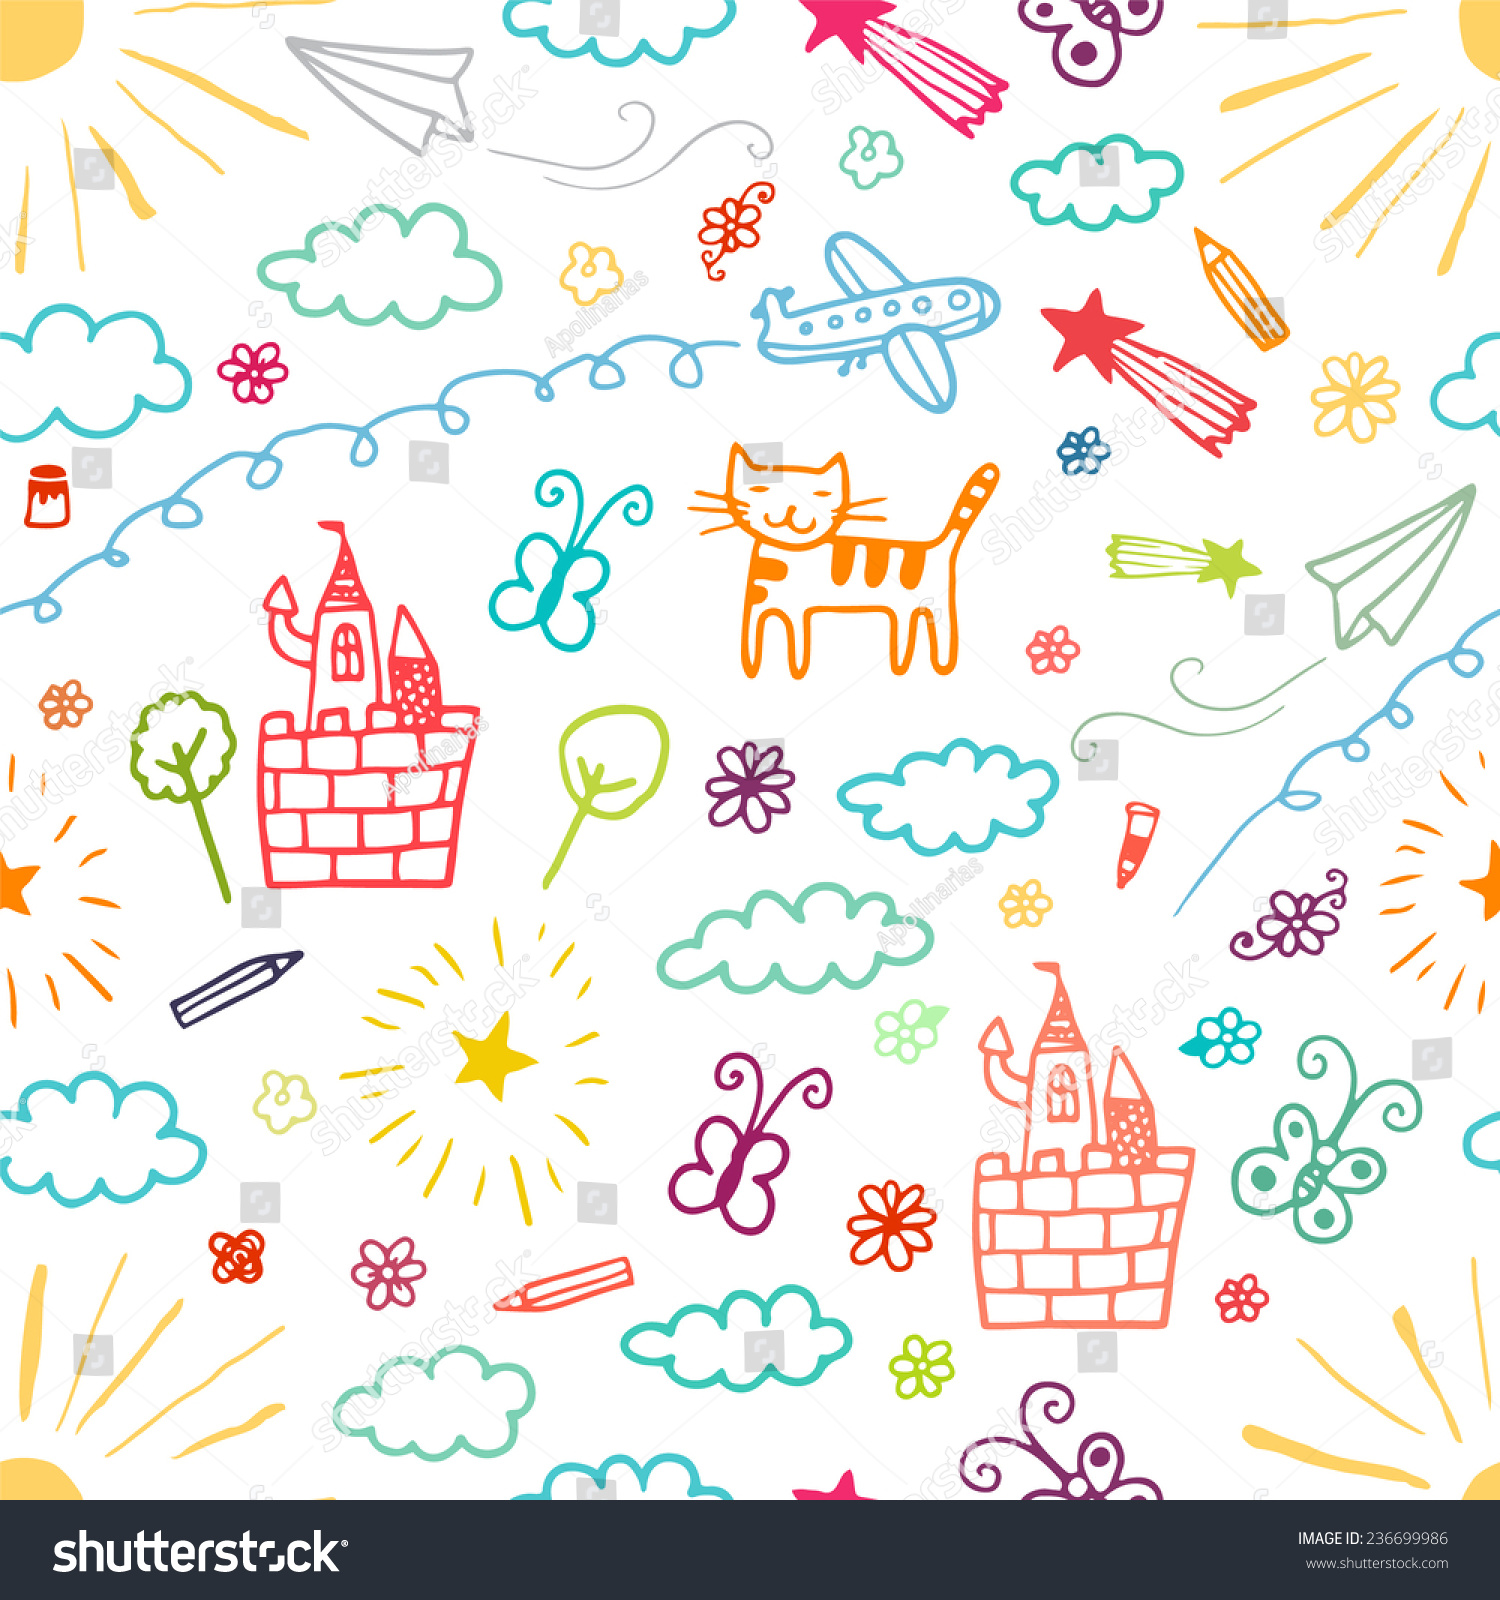 Children drawings color seamless pattern. #236699986